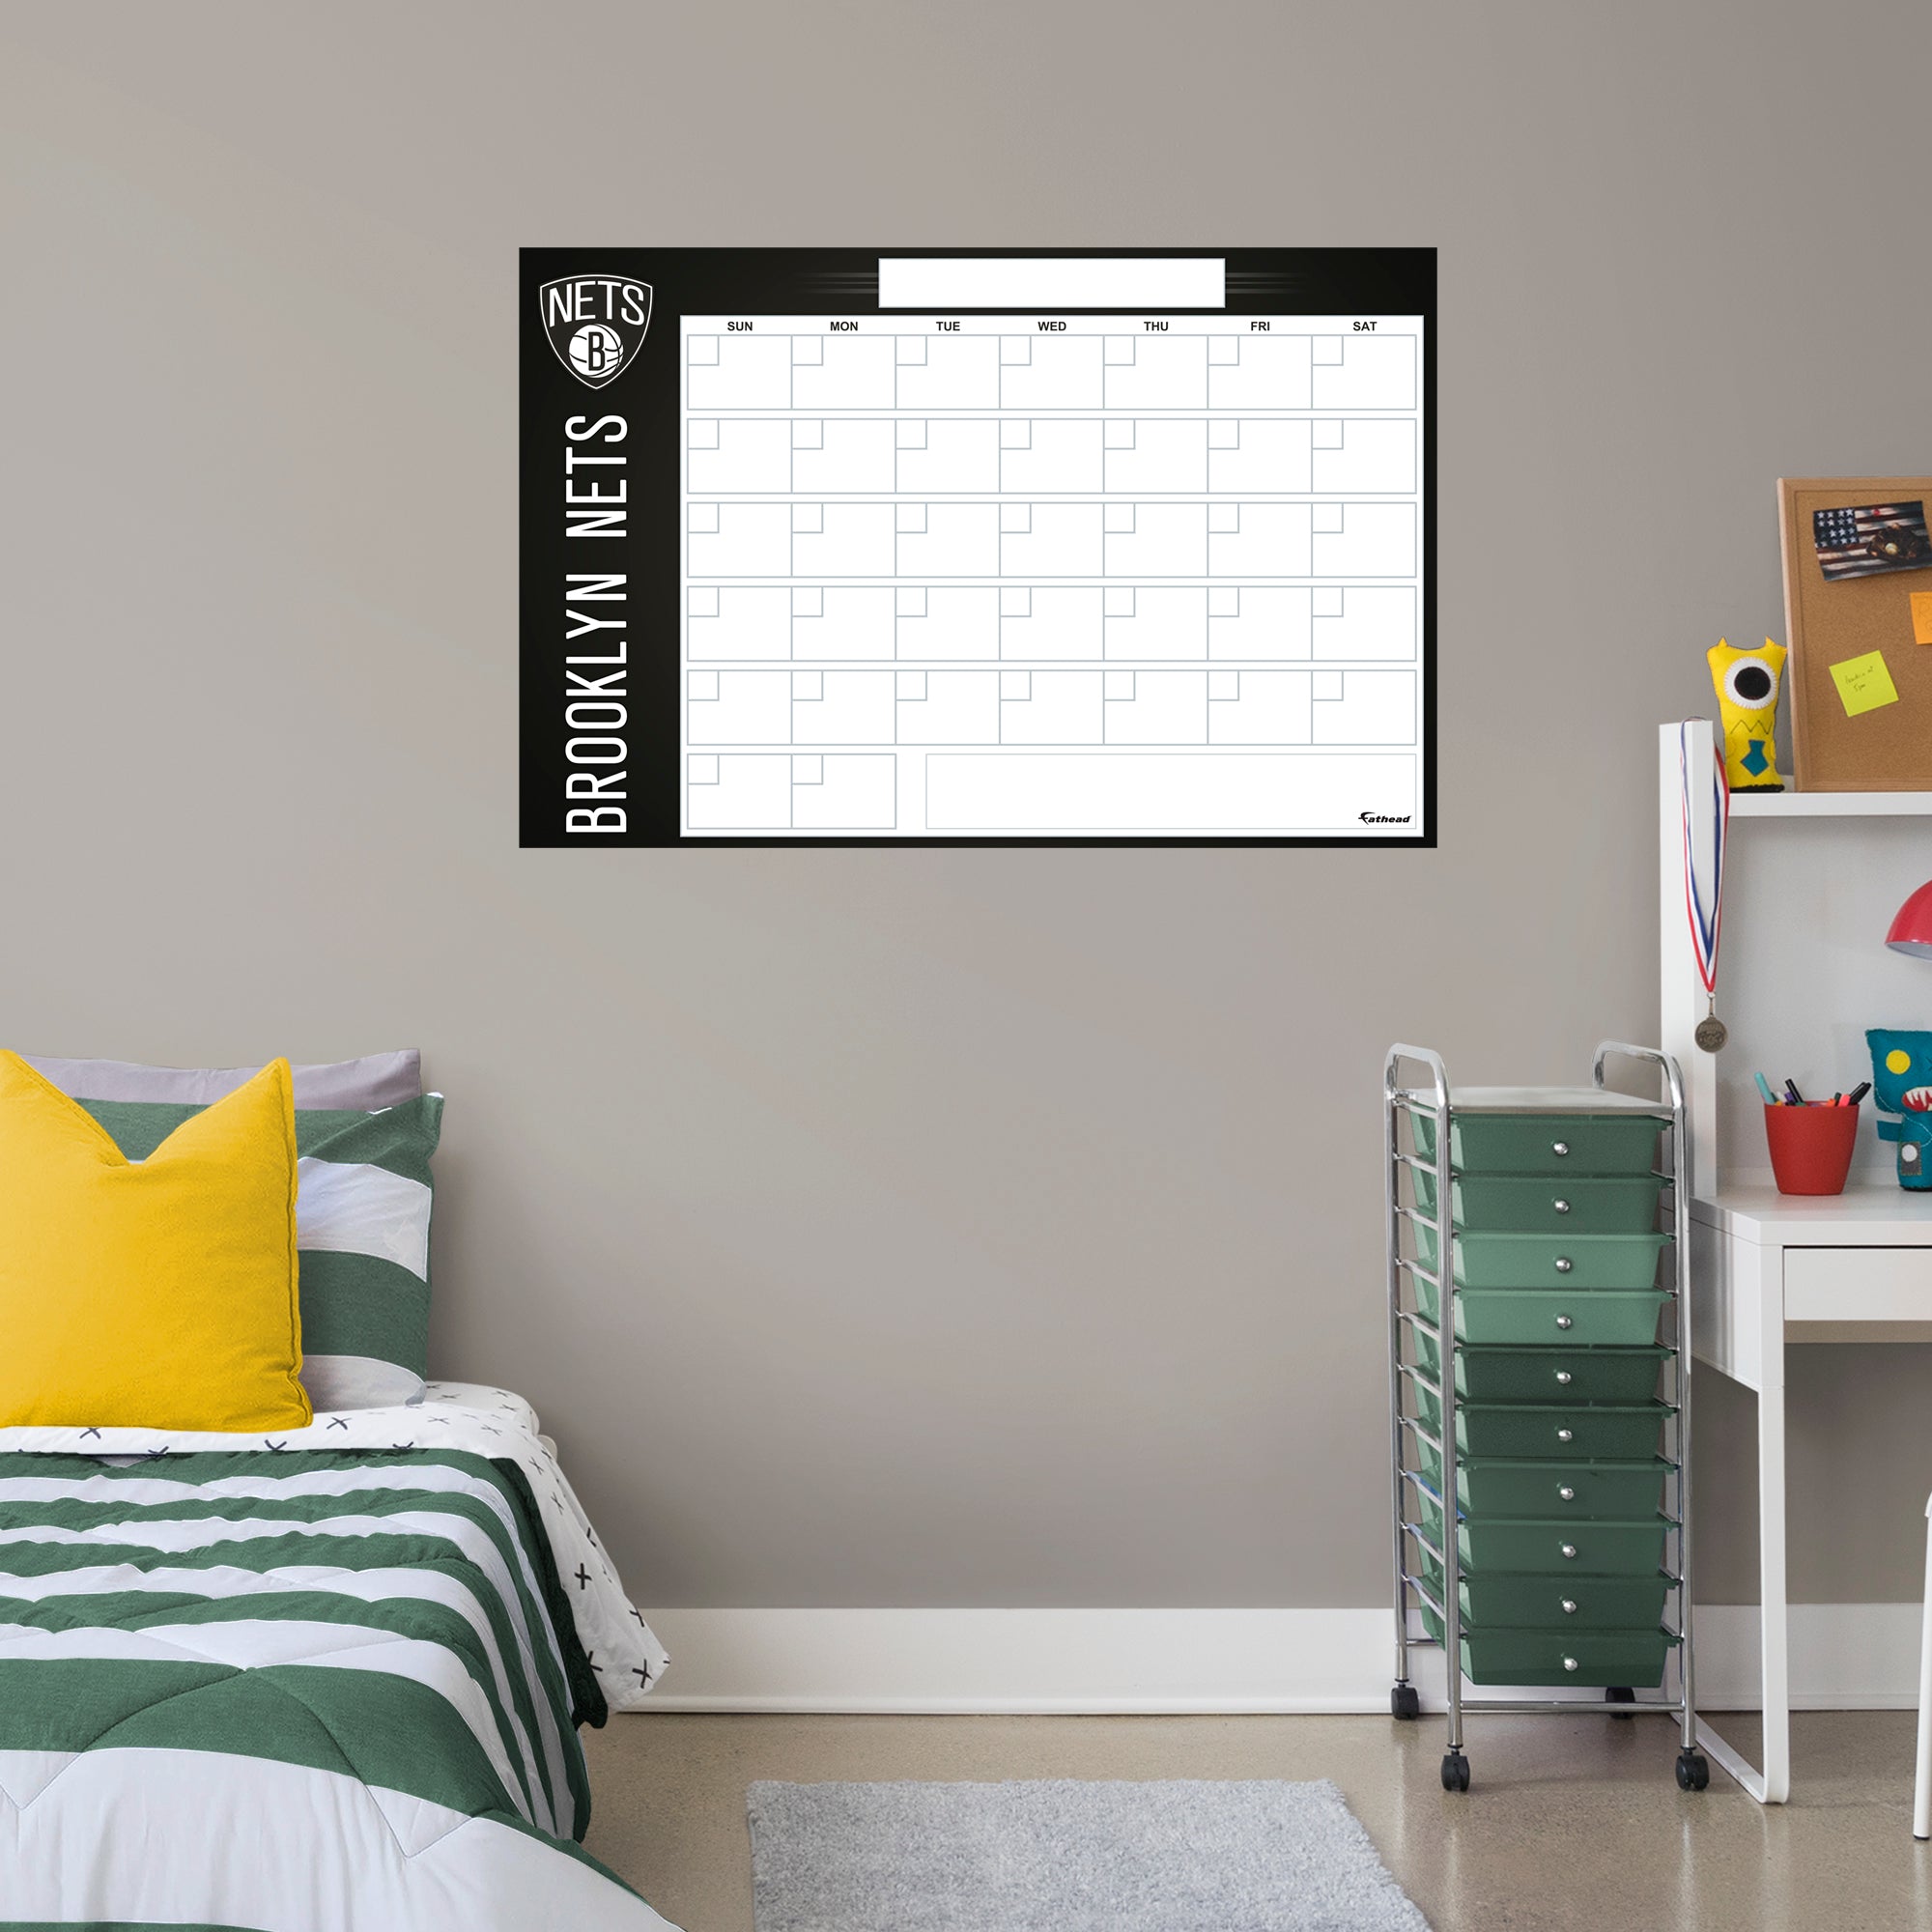 Brooklyn Nets Dry Erase Calendar - Officially Licensed NBA Removable Wall Decal Giant Decal (34"W x 52"H) by Fathead | Vinyl